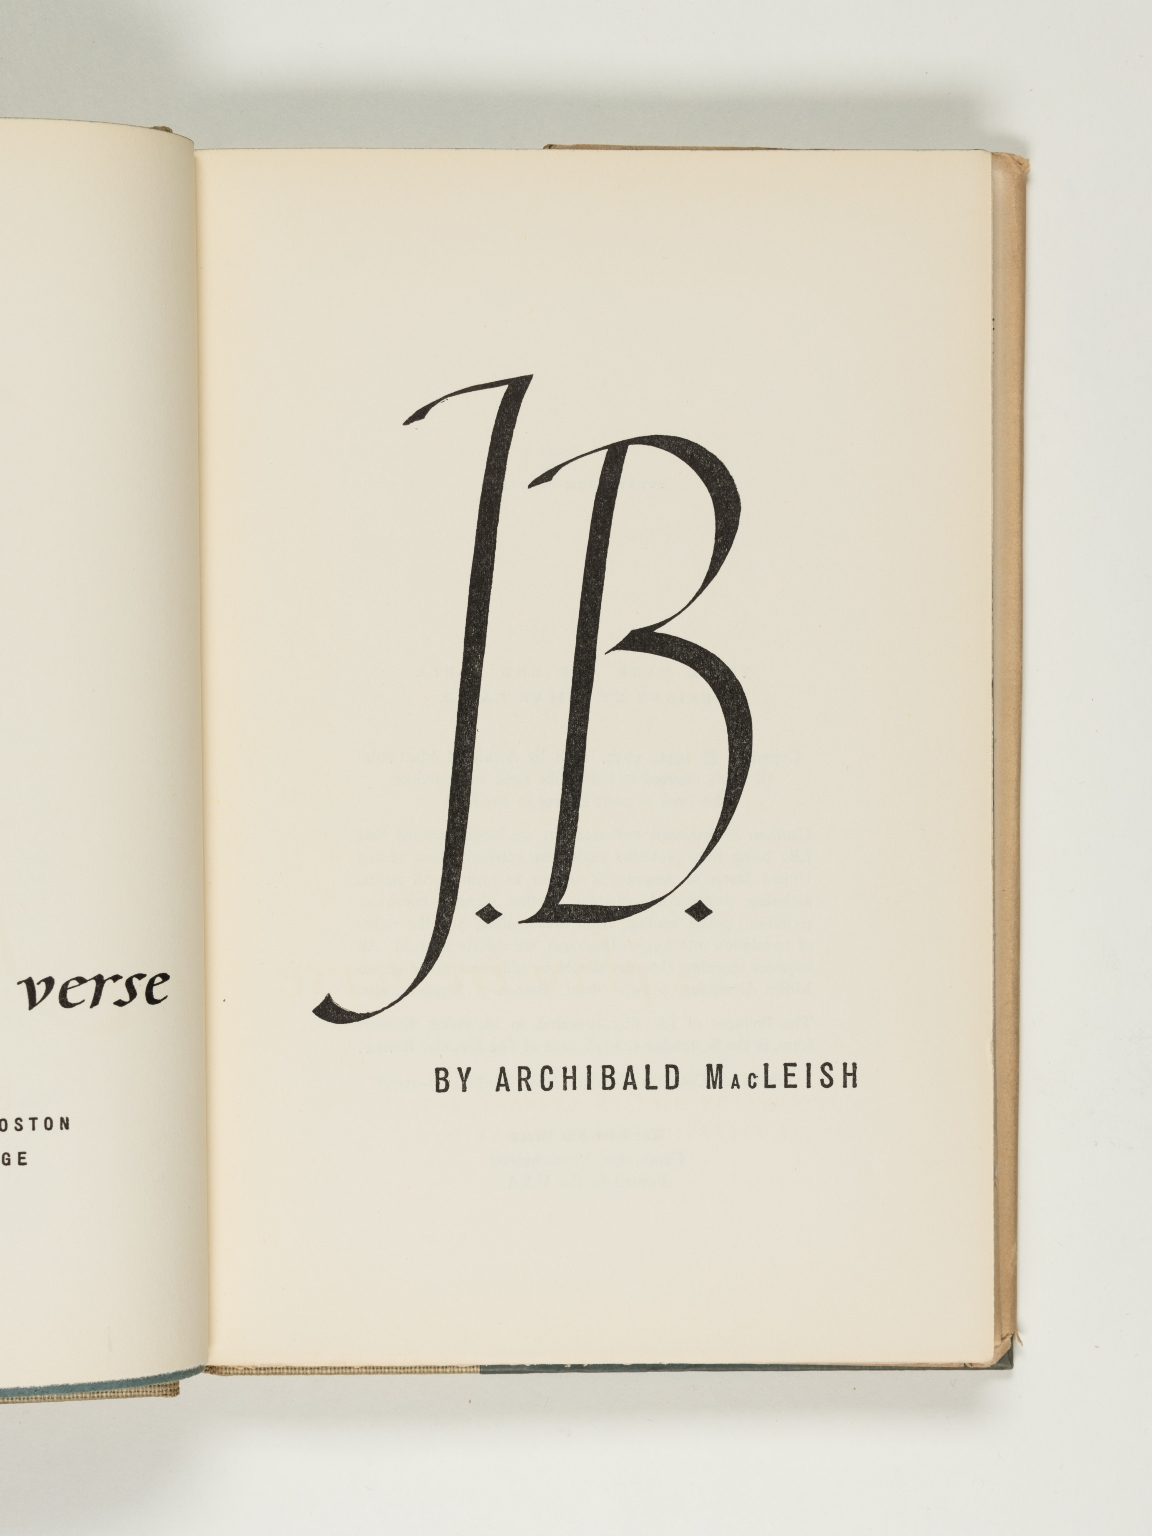 Title page "J. B.: A Play in Verse"